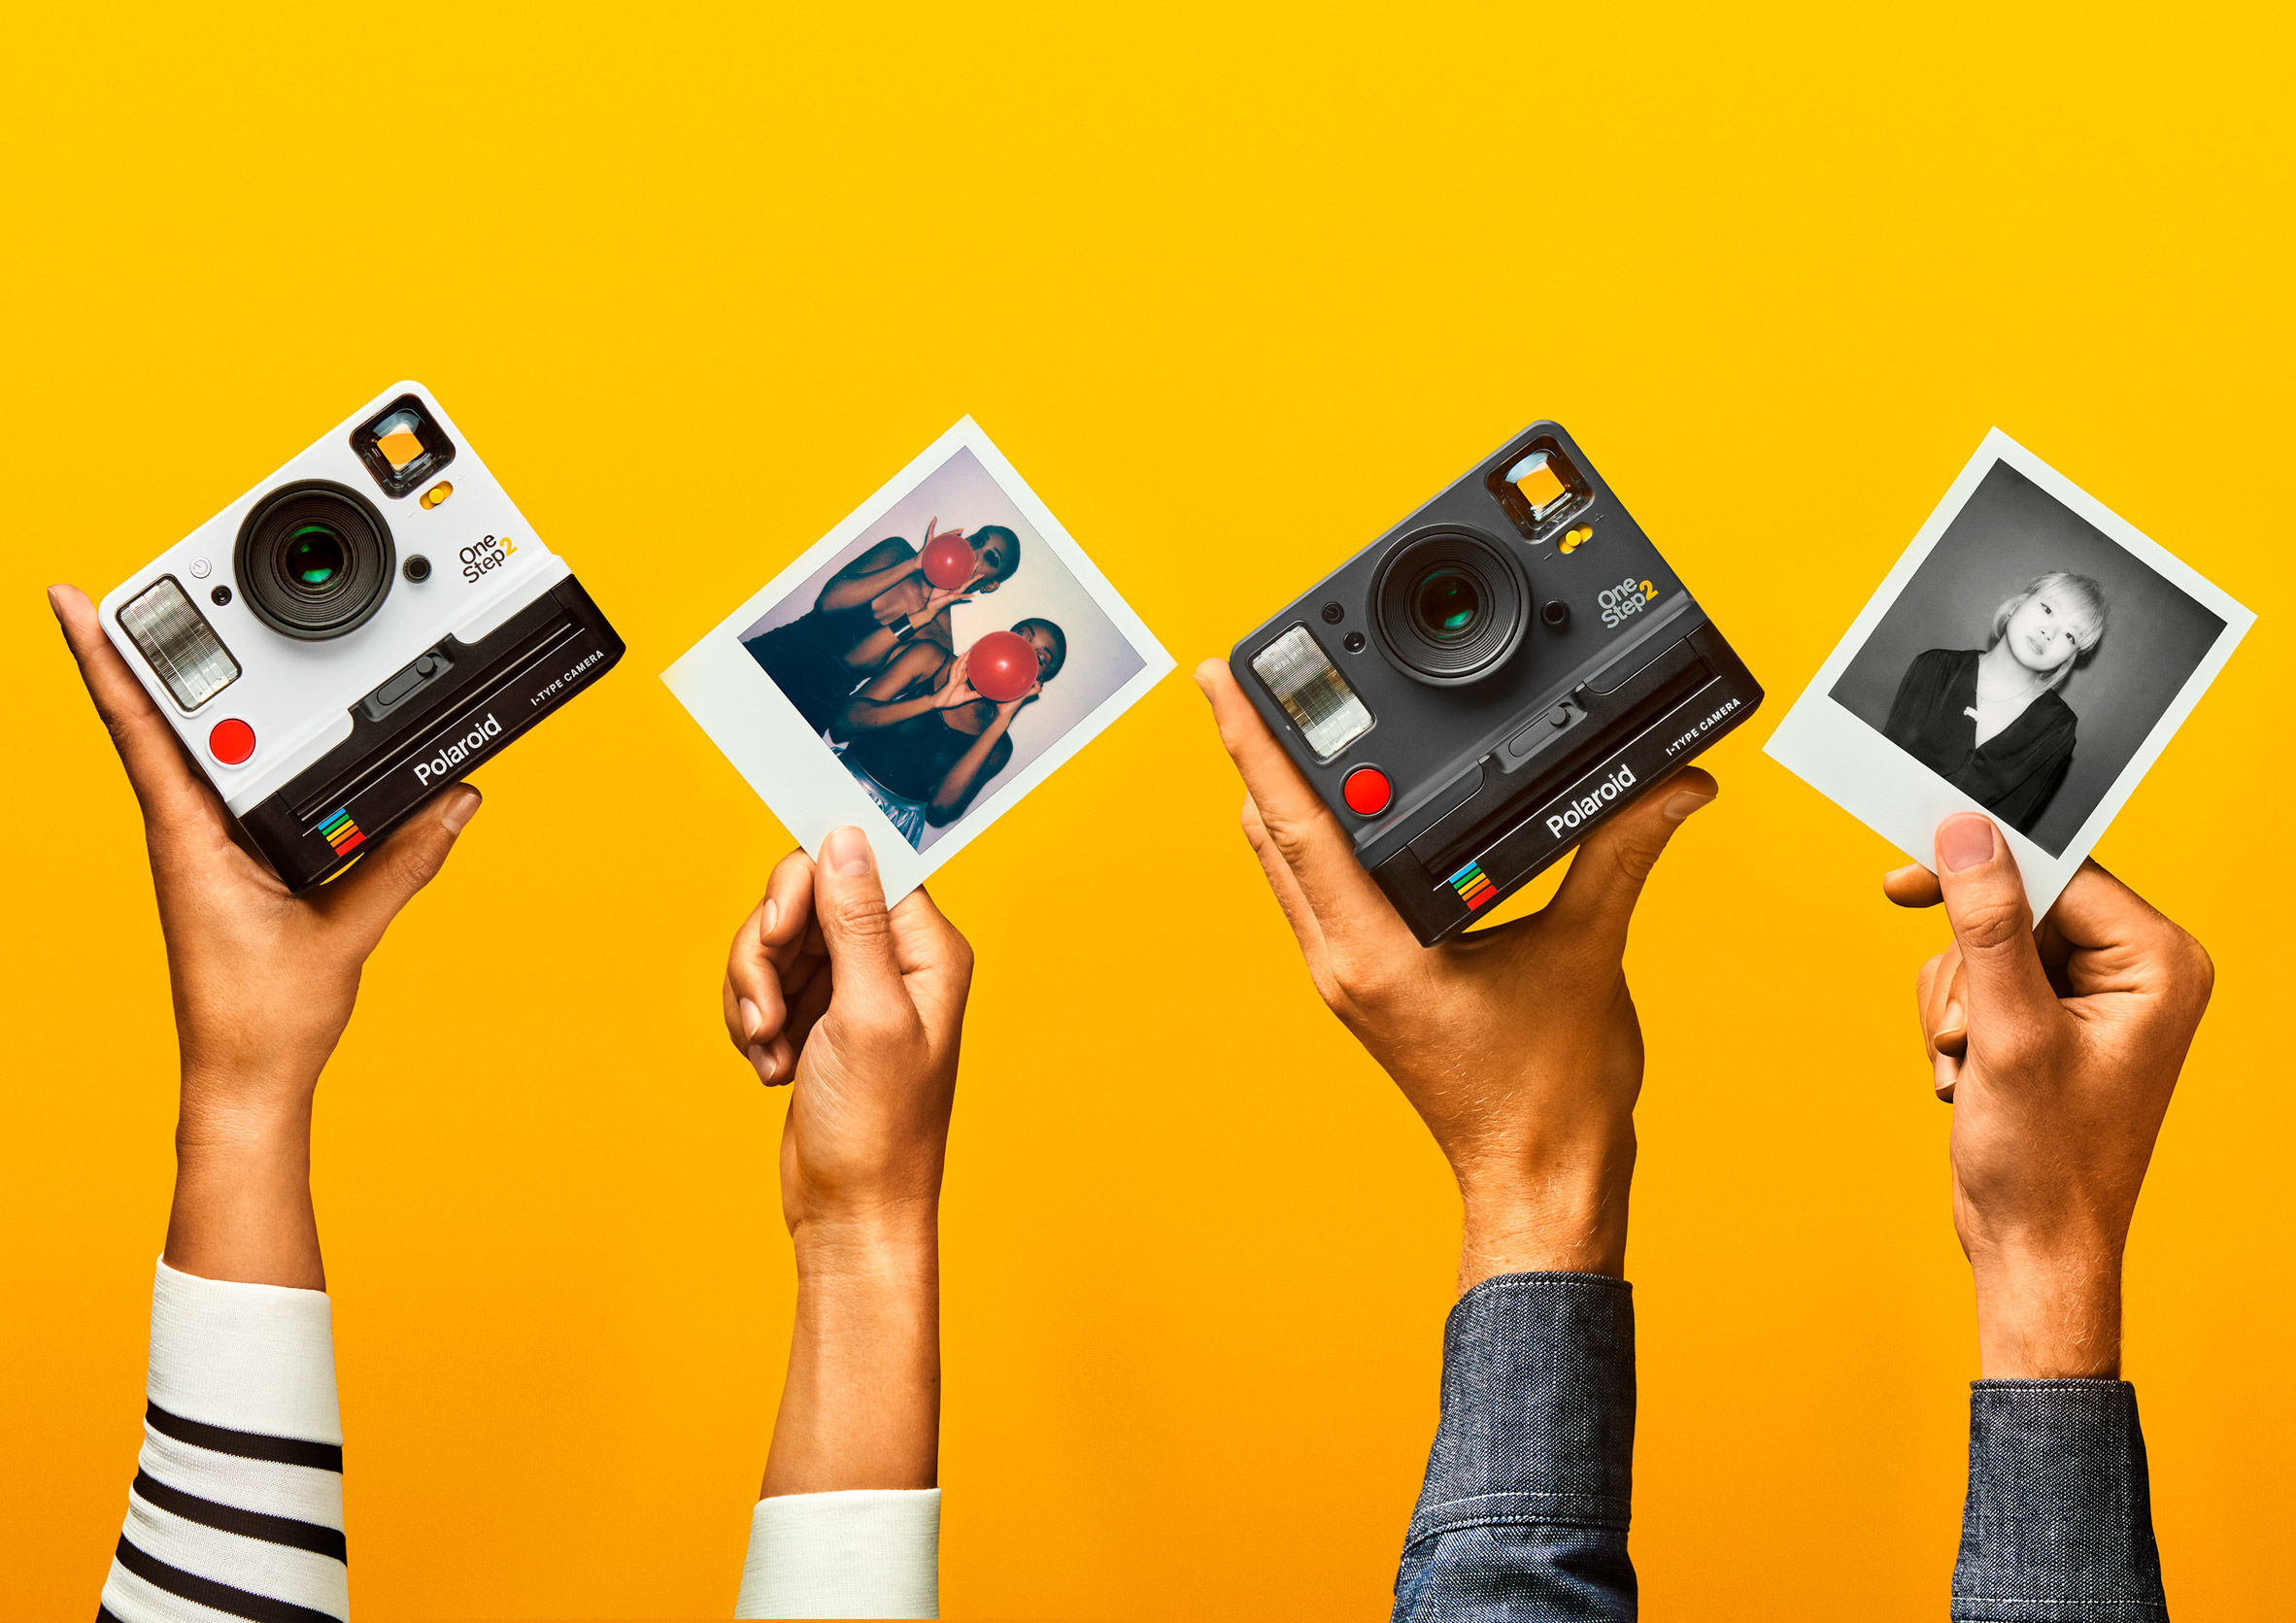 How Polaroid was brought back from the brink of death